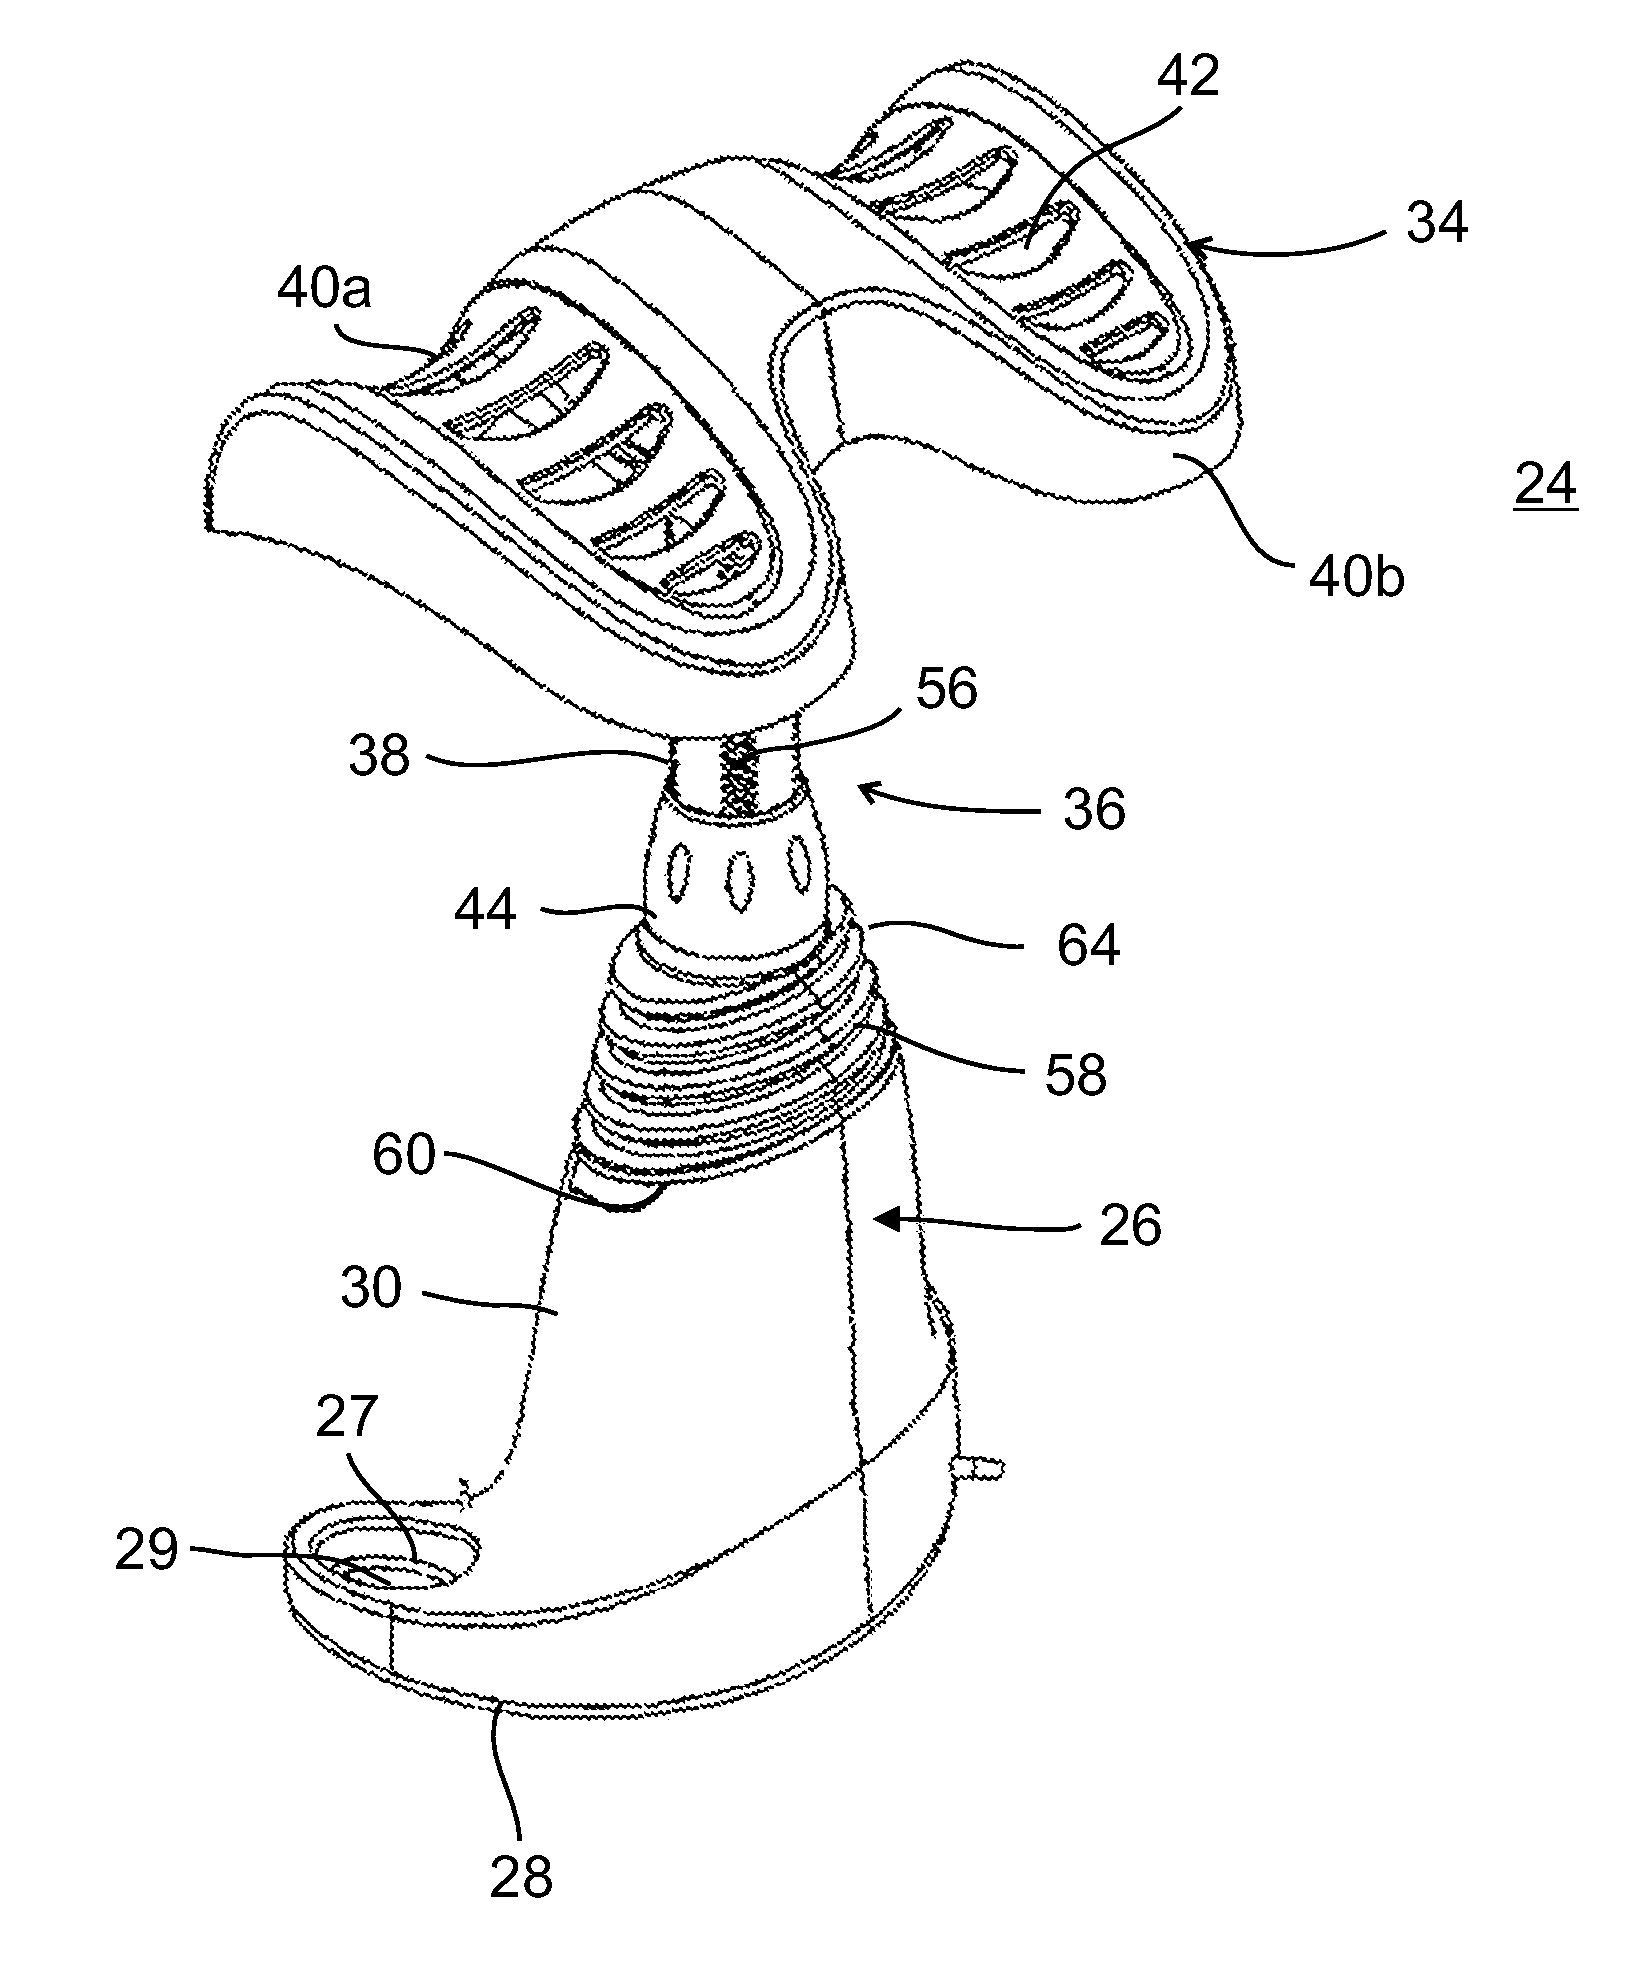 Device for relieving or preventing lower back pain